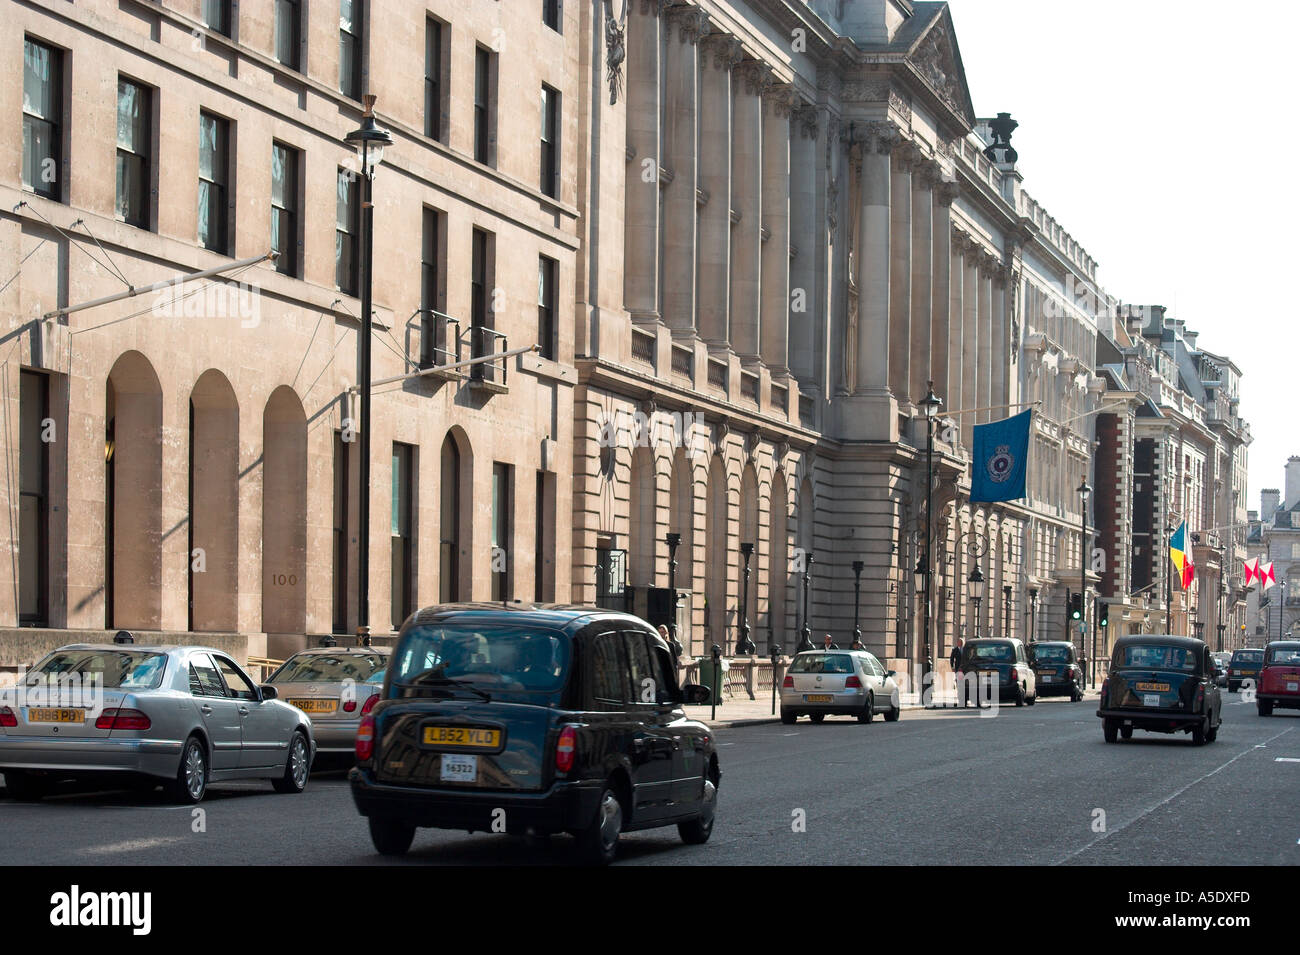 Pall Mall in London England Stock Photo - Alamy